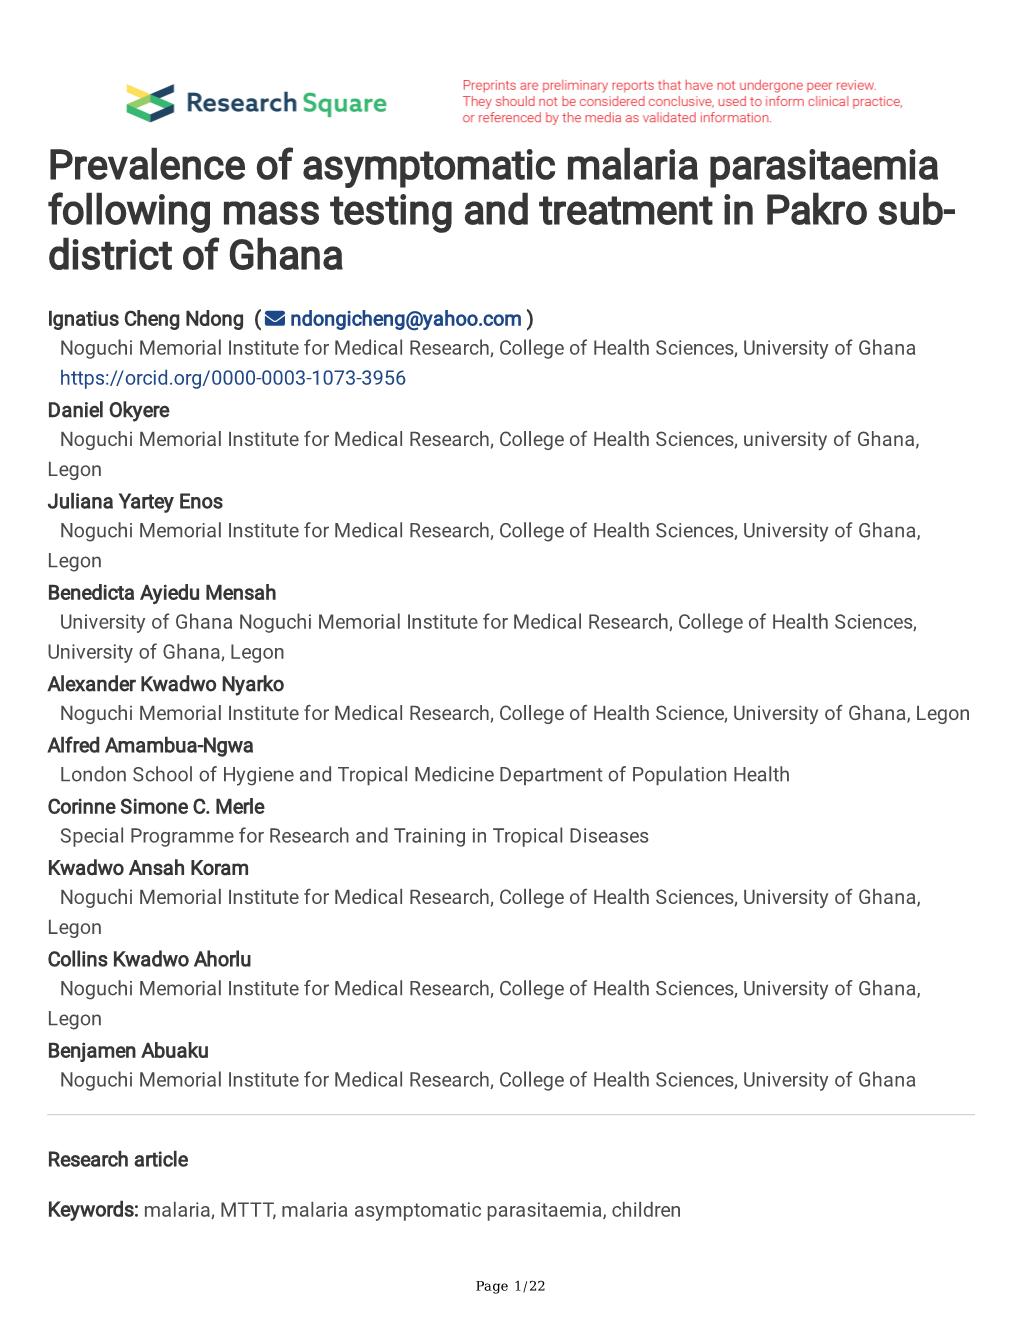 Prevalence of Asymptomatic Malaria Parasitaemia Following Mass Testing and Treatment in Pakro Sub- District of Ghana